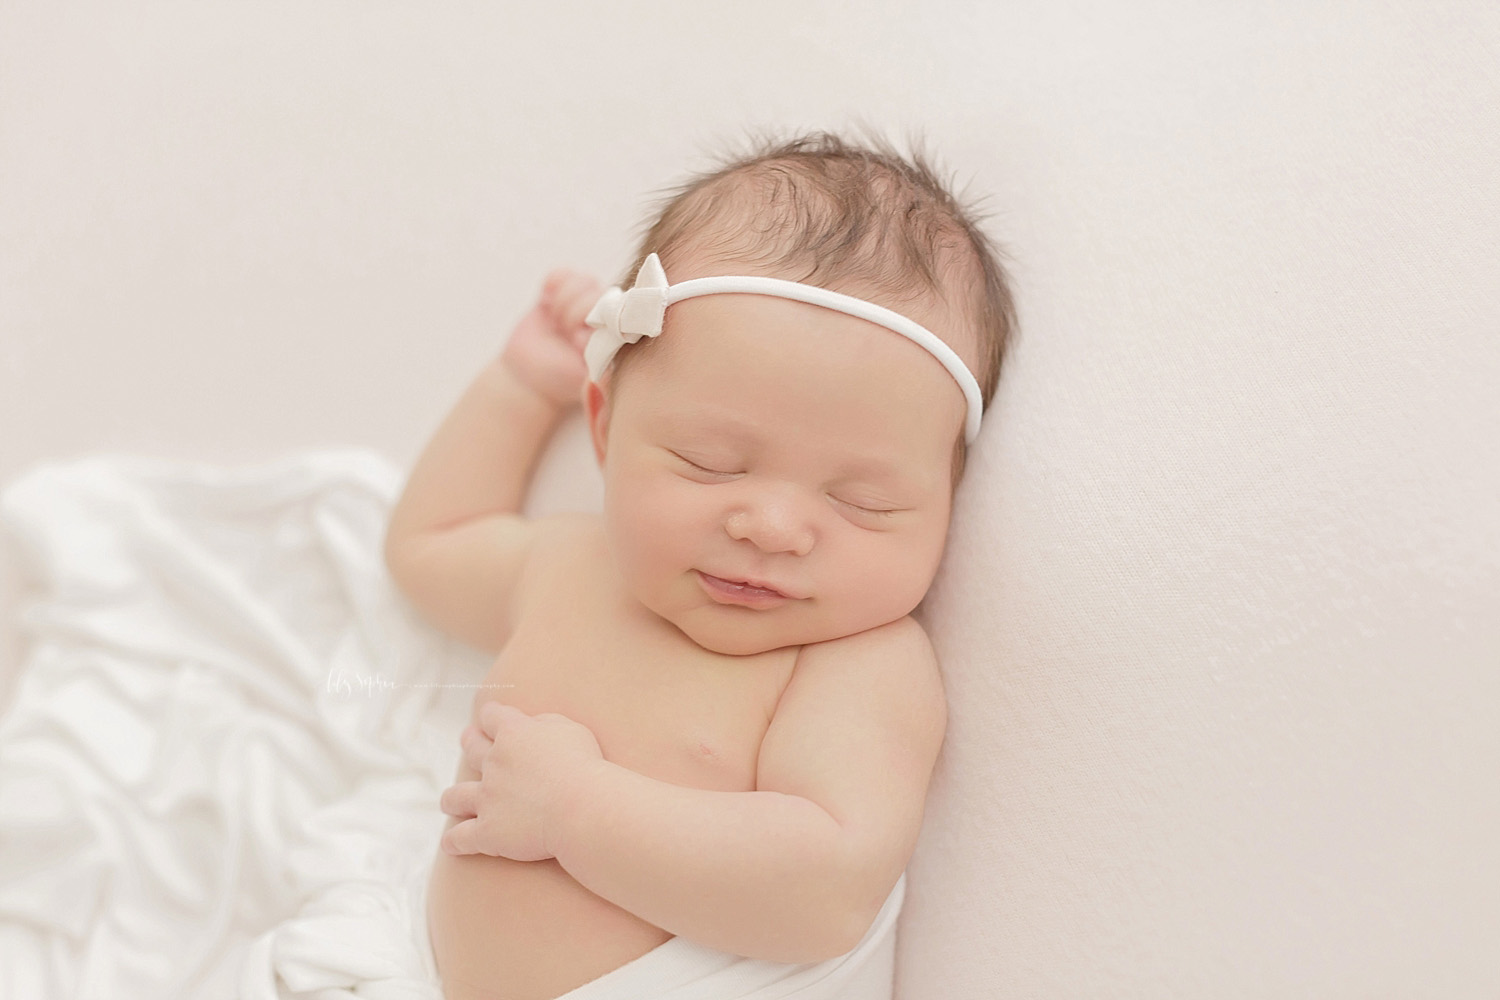  Image of a newborn, baby, girl, sleeping on her back, grinning, with one had on her tummy and one had by her head, wearing a white bow in her hair.&nbsp; 